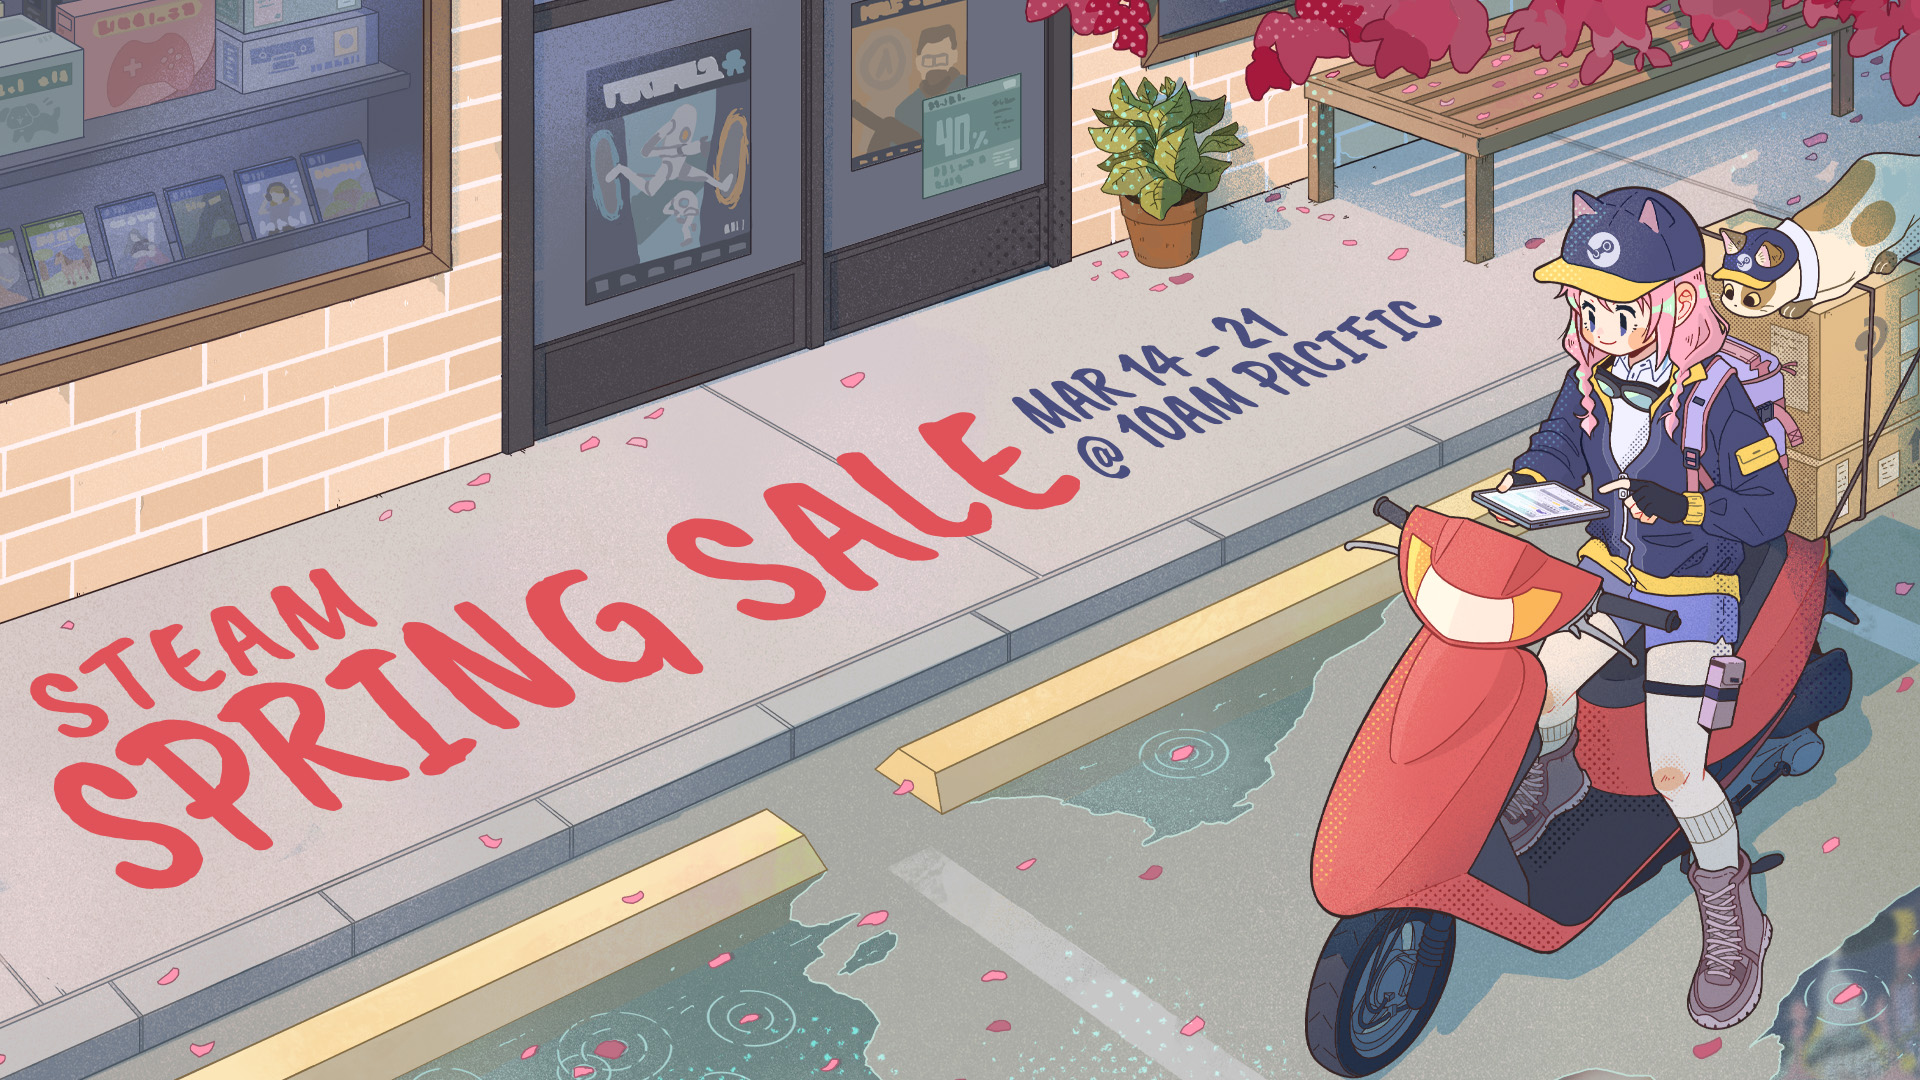  The Steam Spring Sale is live 